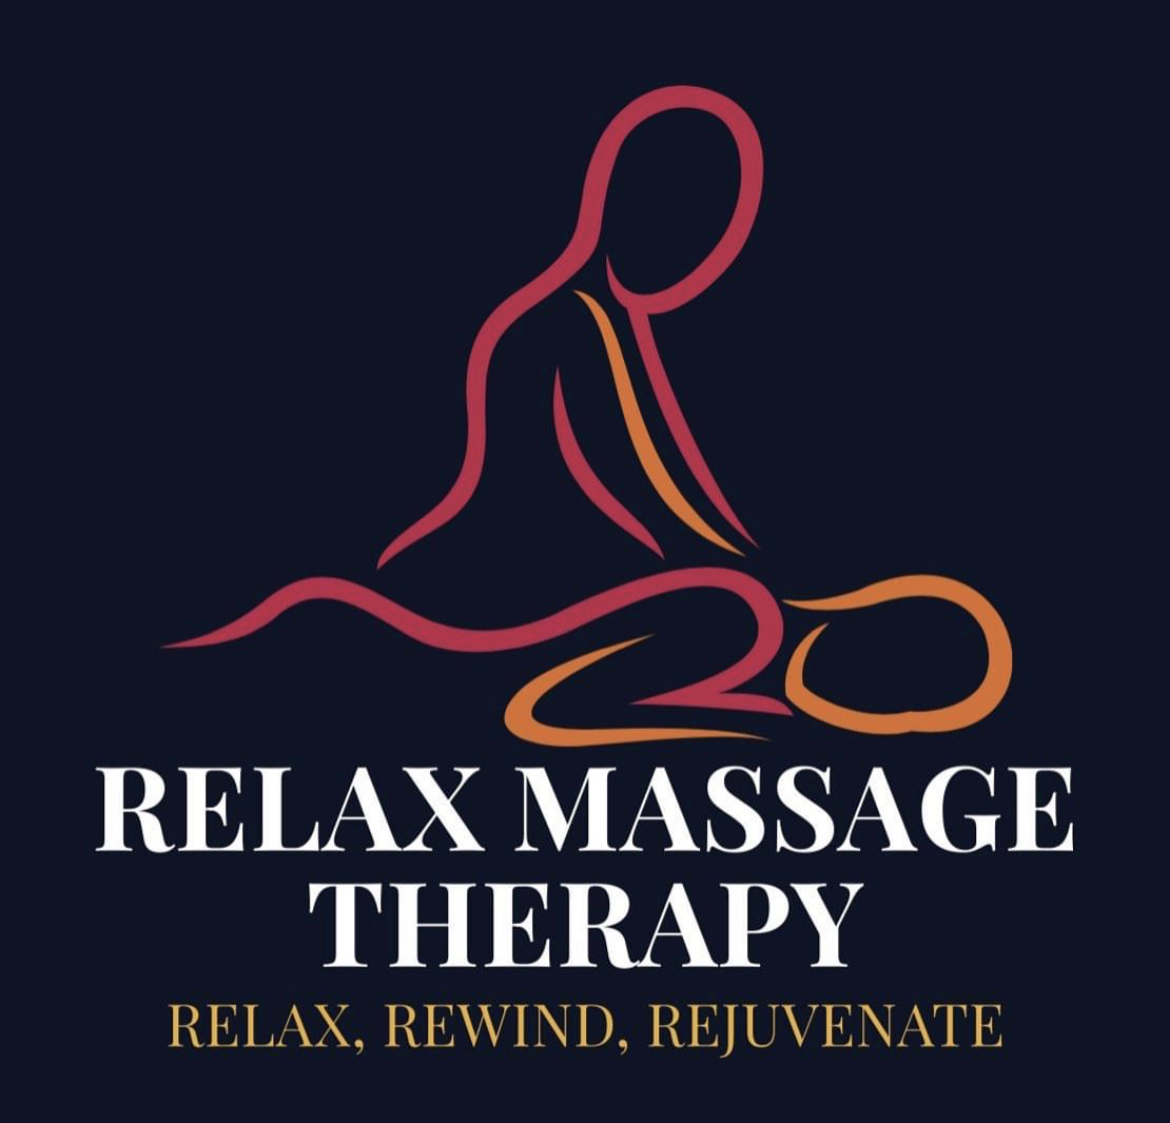 Relax Massage Therapy 4754 N French Rd, East Amherst New York 14051